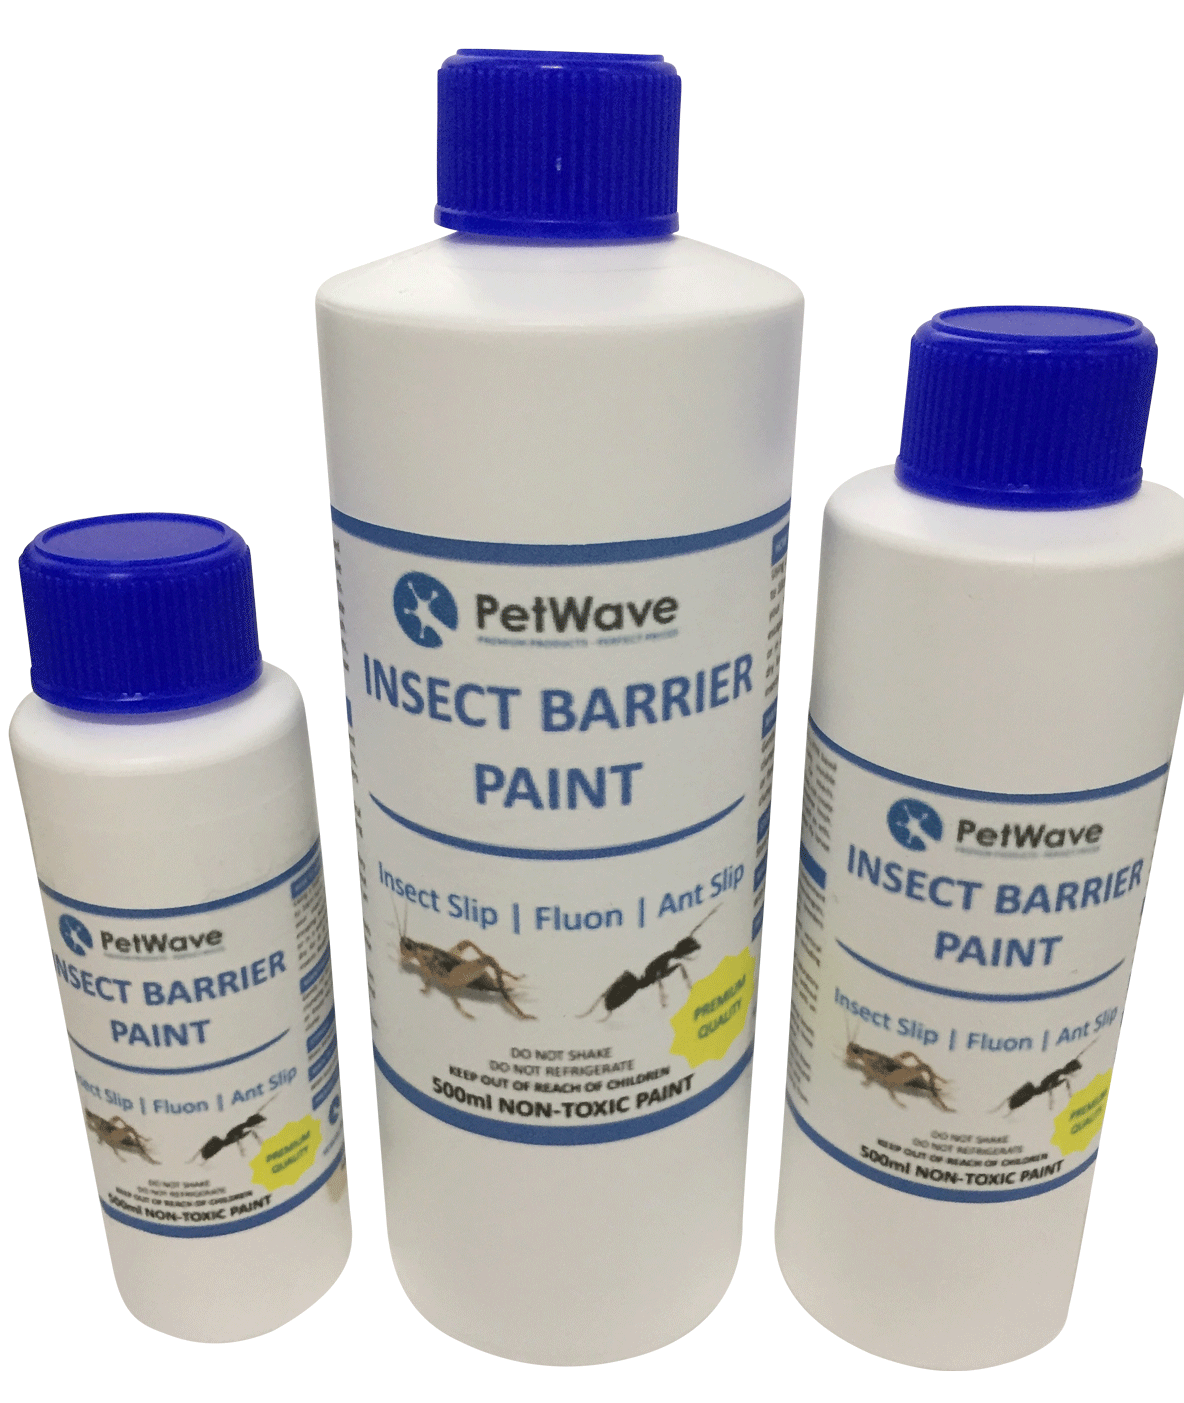 Fluon | Concentrated Insect Barrier Paint | Live Insect Control | Fluon Insect Film | Woodies Teflon Barrier |  Fluon AD-1 | Ant Slip | Fluon Paint